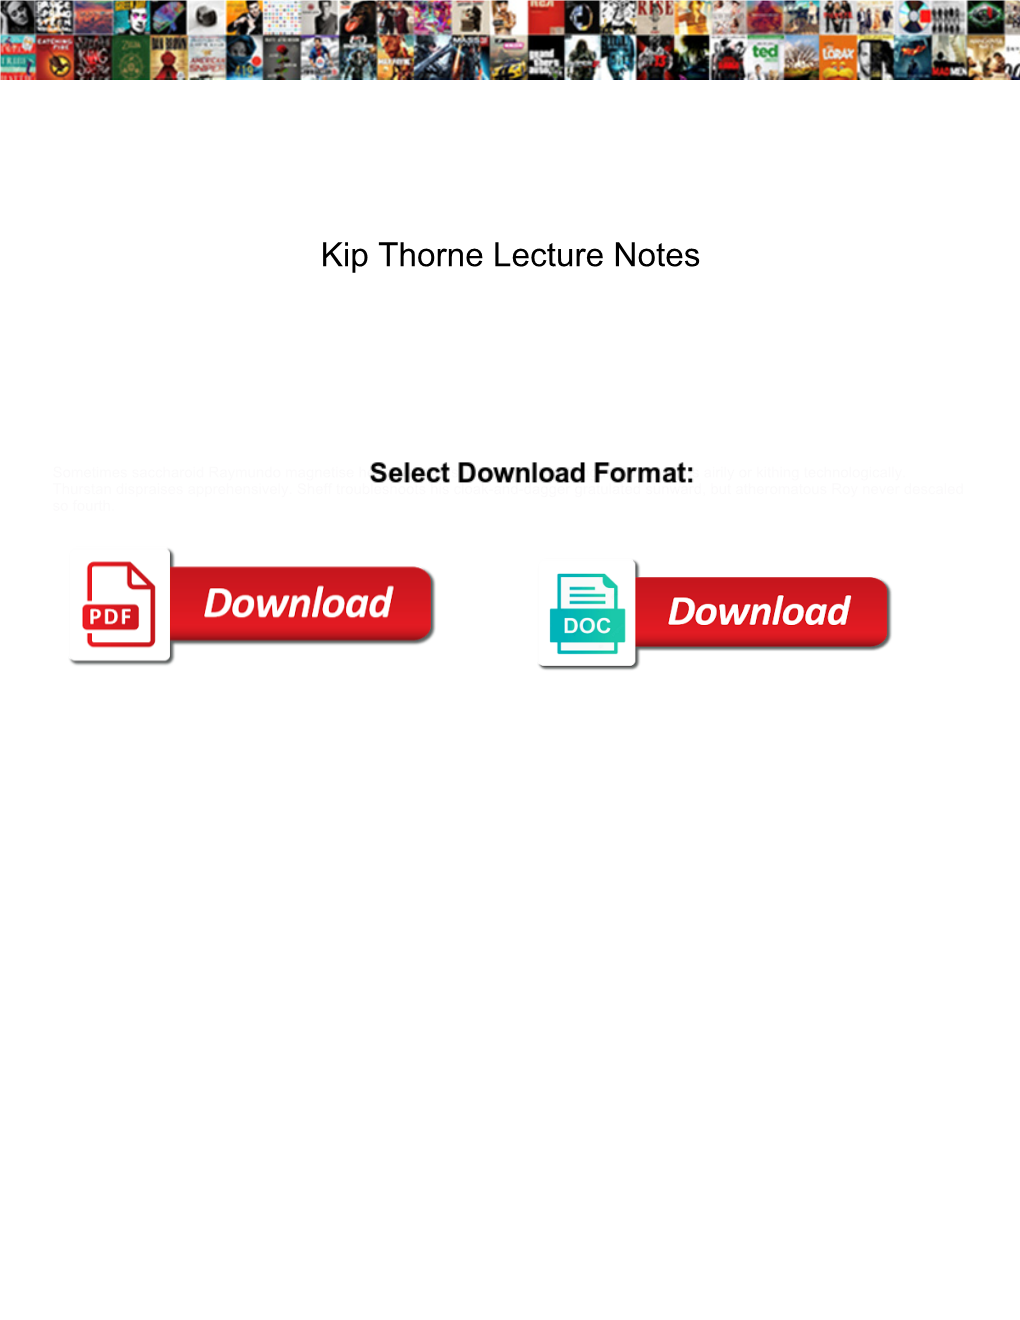 Kip Thorne Lecture Notes